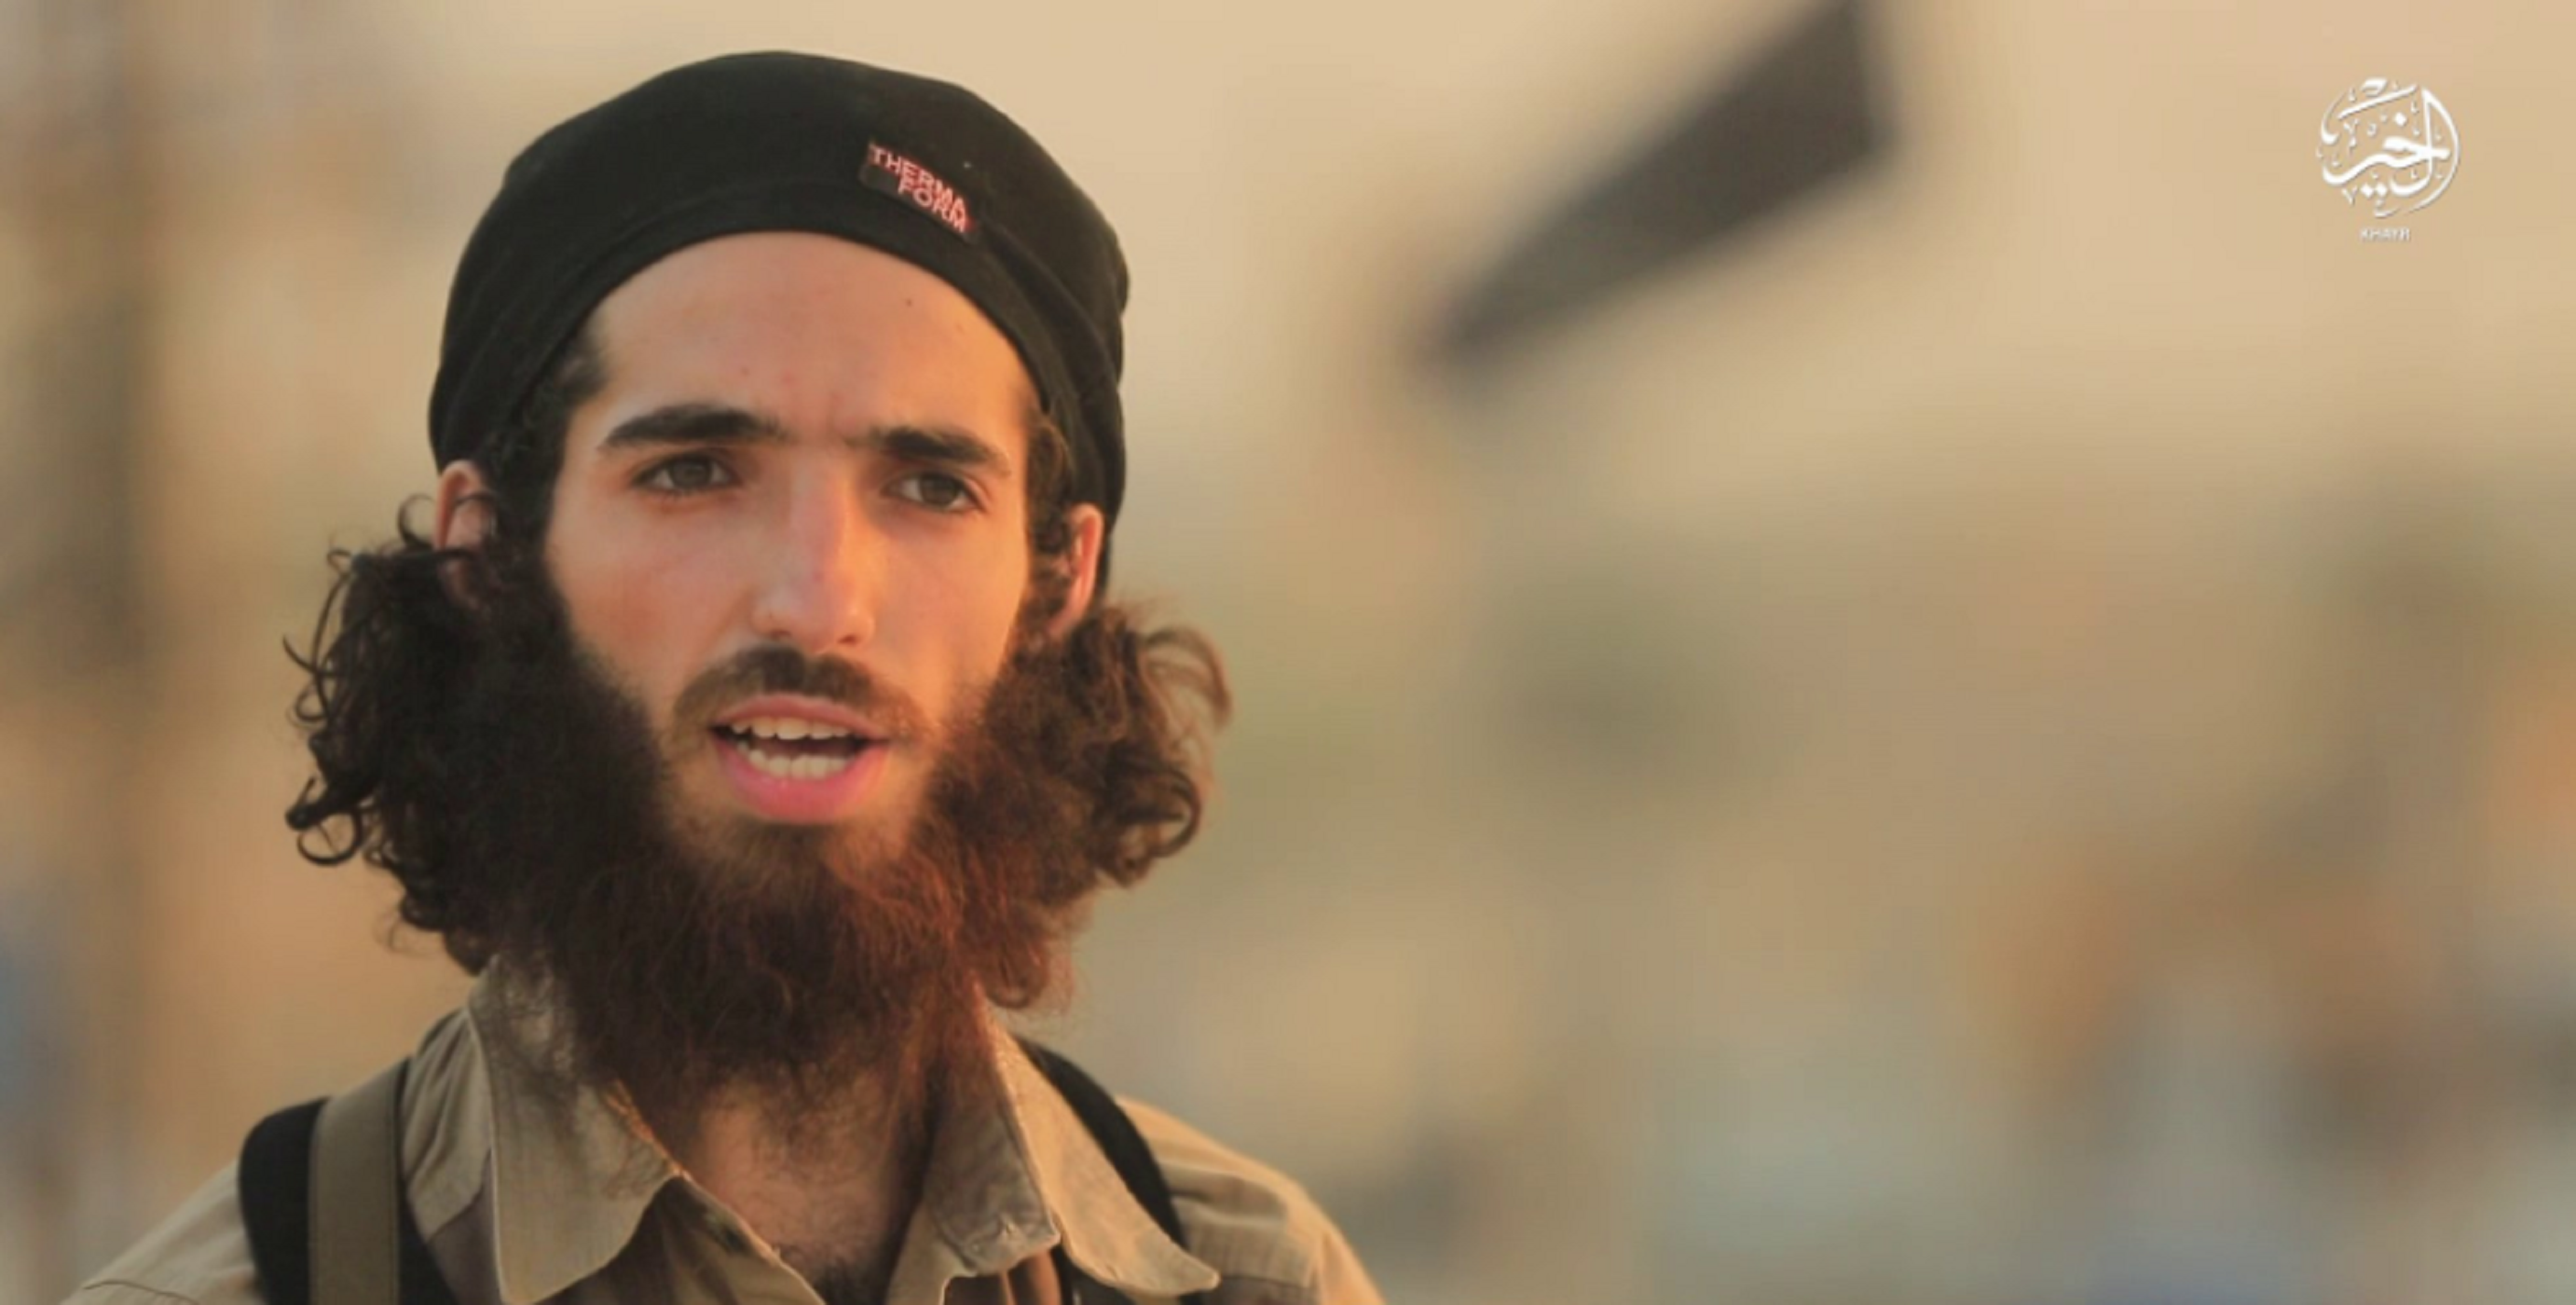 Who is the terrorist threatening Spain in Daesh's new video?